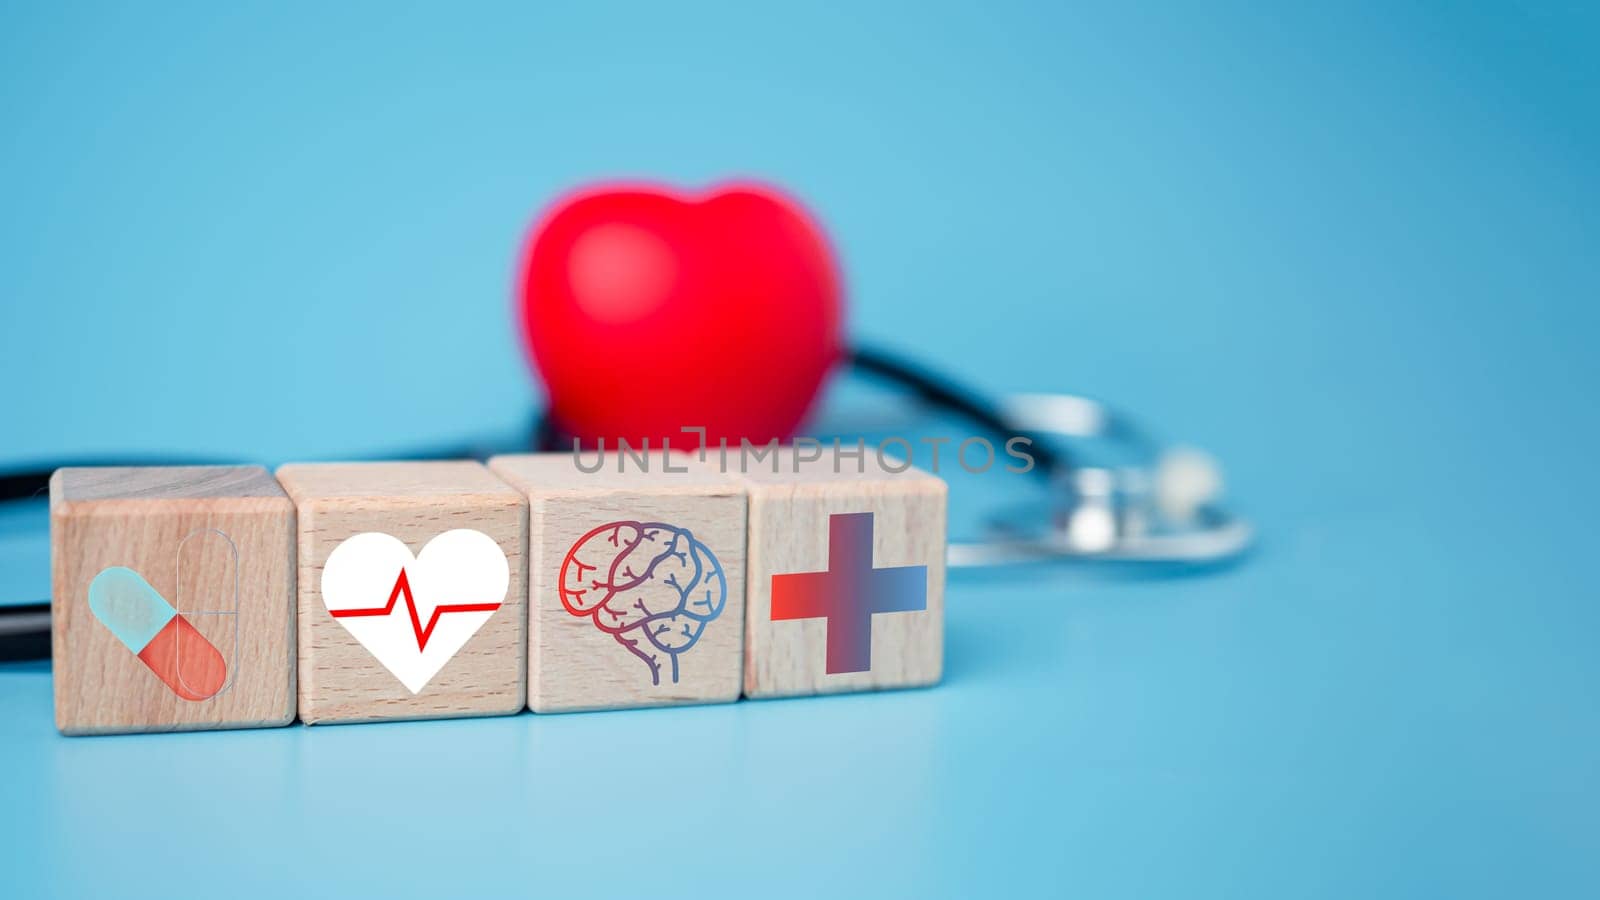 The concept of health insurance and medical welfare. Block wooden and red heart with plus icon. Health insurance and access to health care.  by Unimages2527